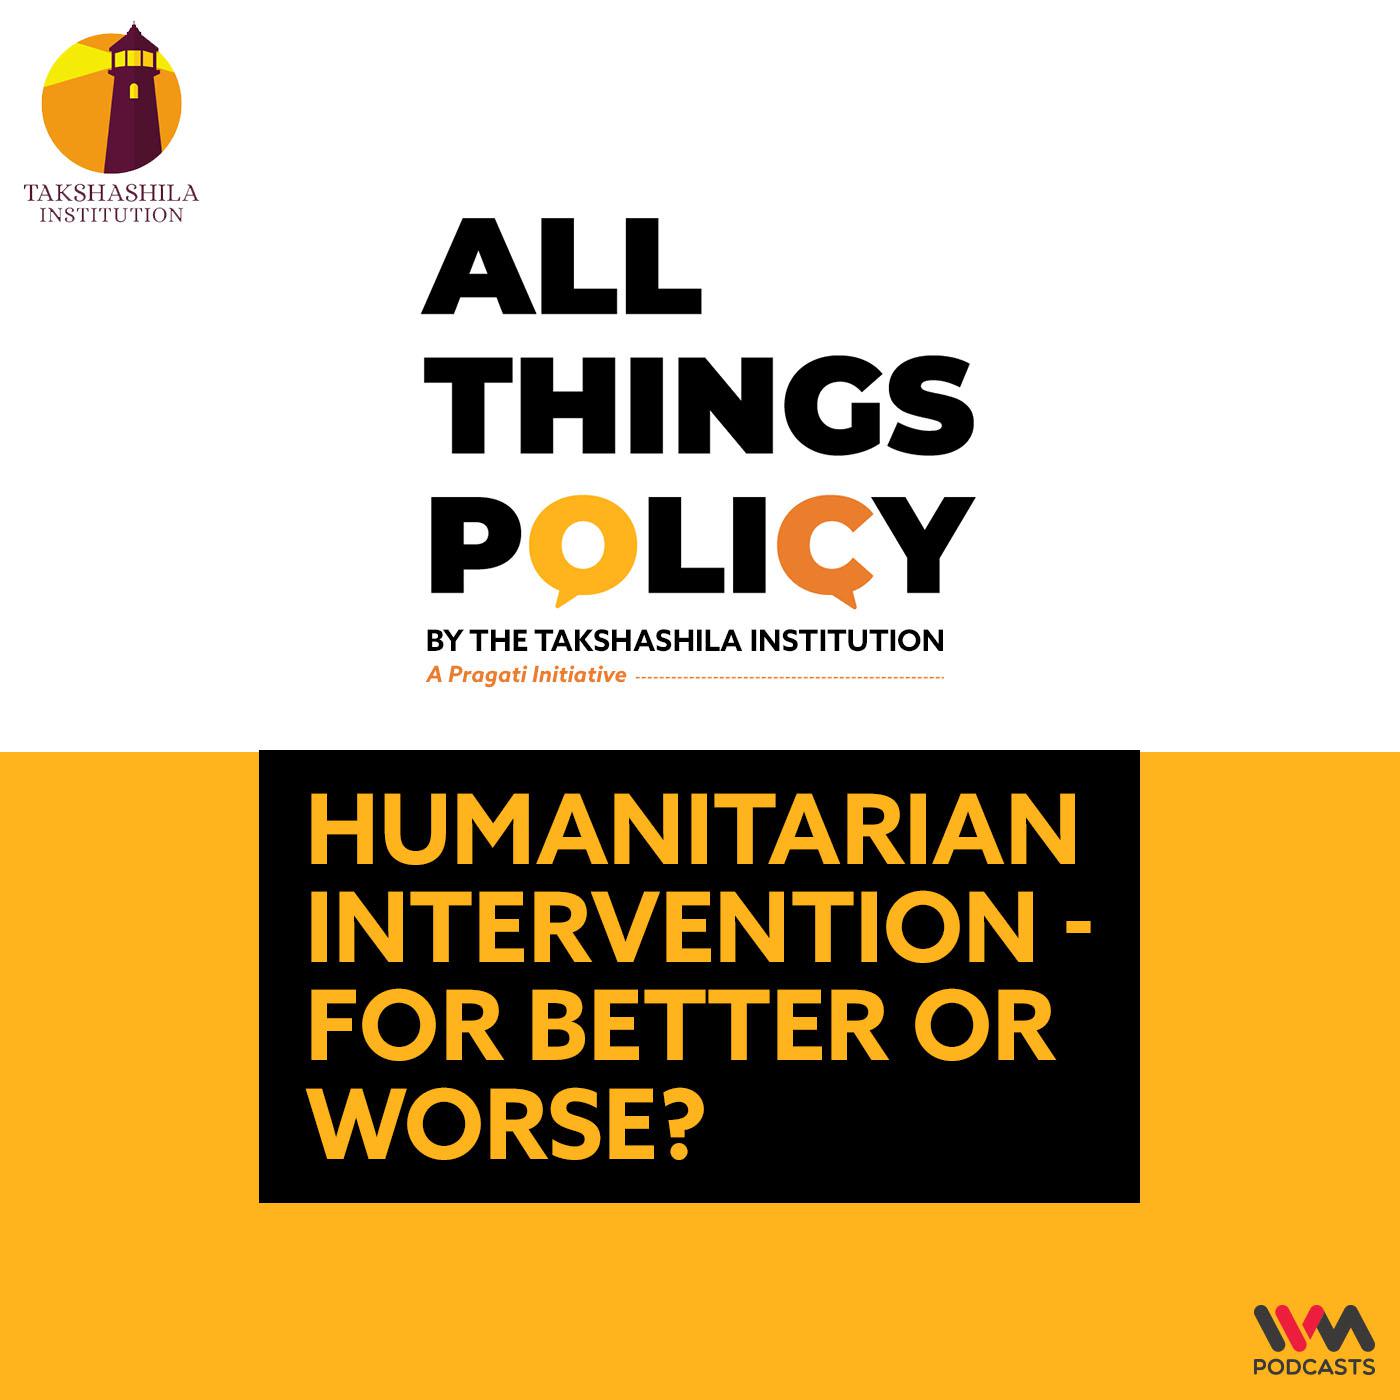 Humanitarian Intervention - For Better or Worse?